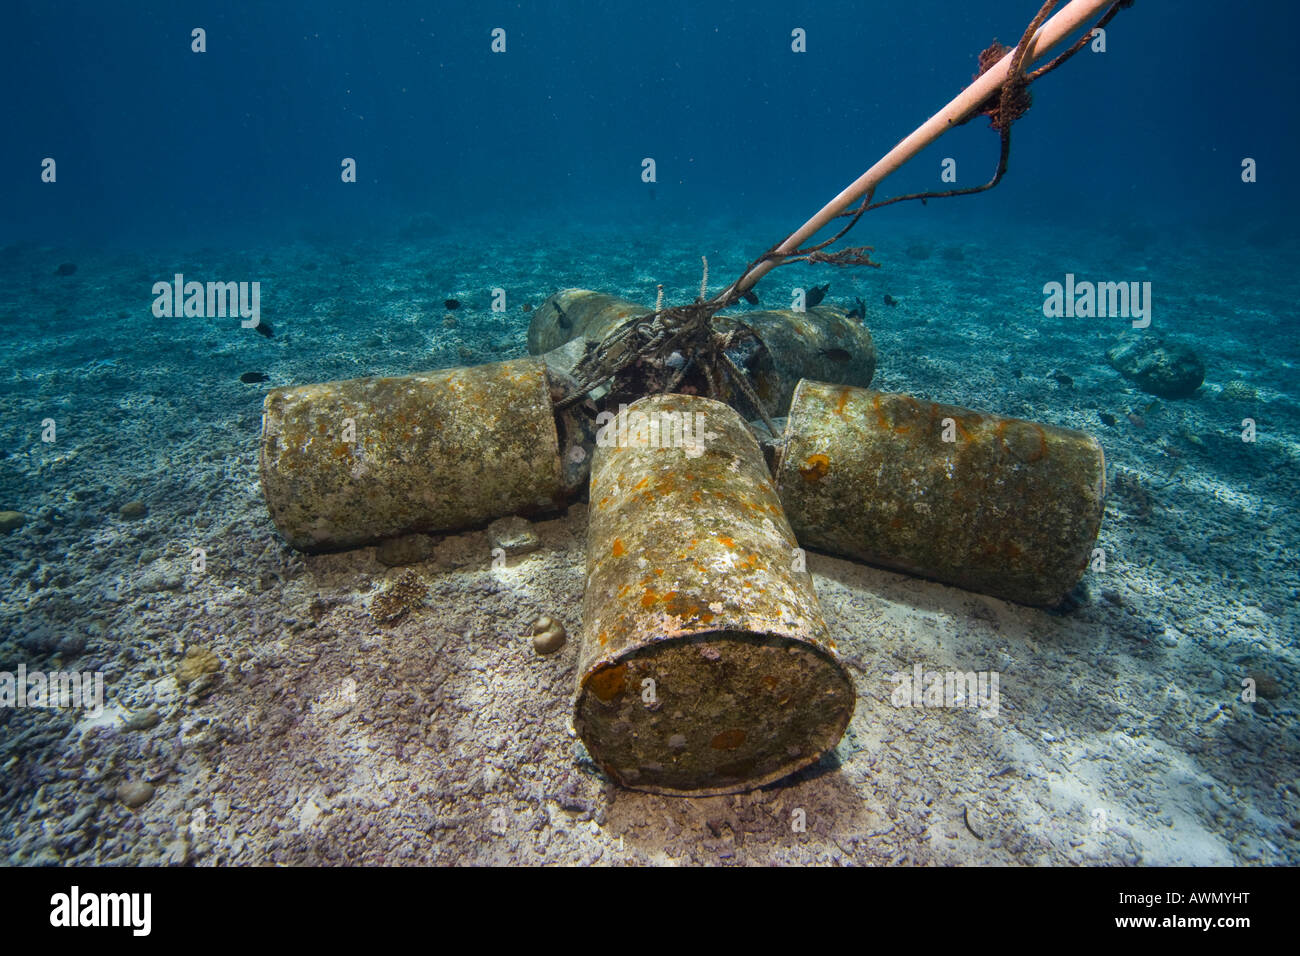 Barrels used to anchor a buoy on the ocean floor, Bunaken, Indonesia, Southeast Asia, Asia Stock Photo